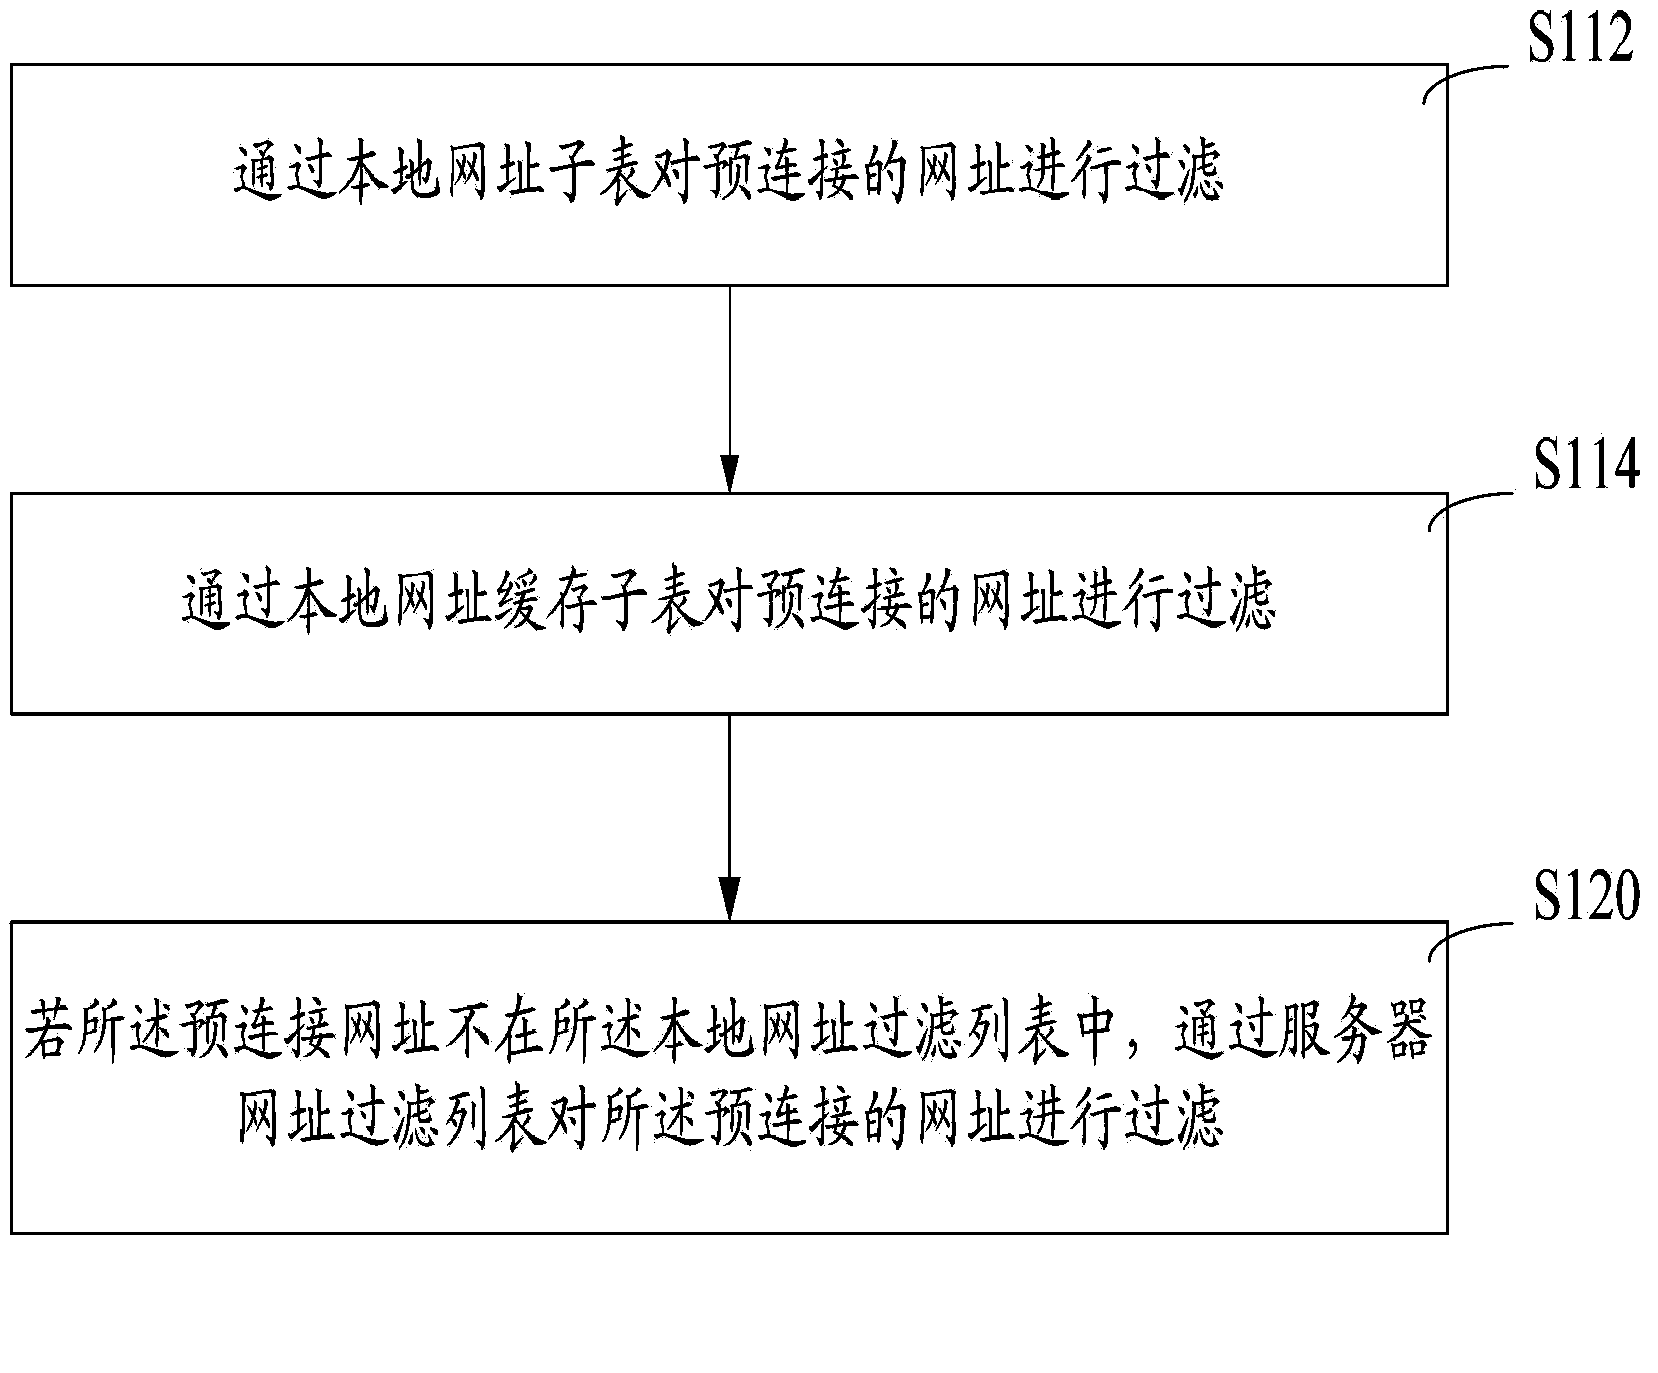 Method and system for identifying malicious web sites